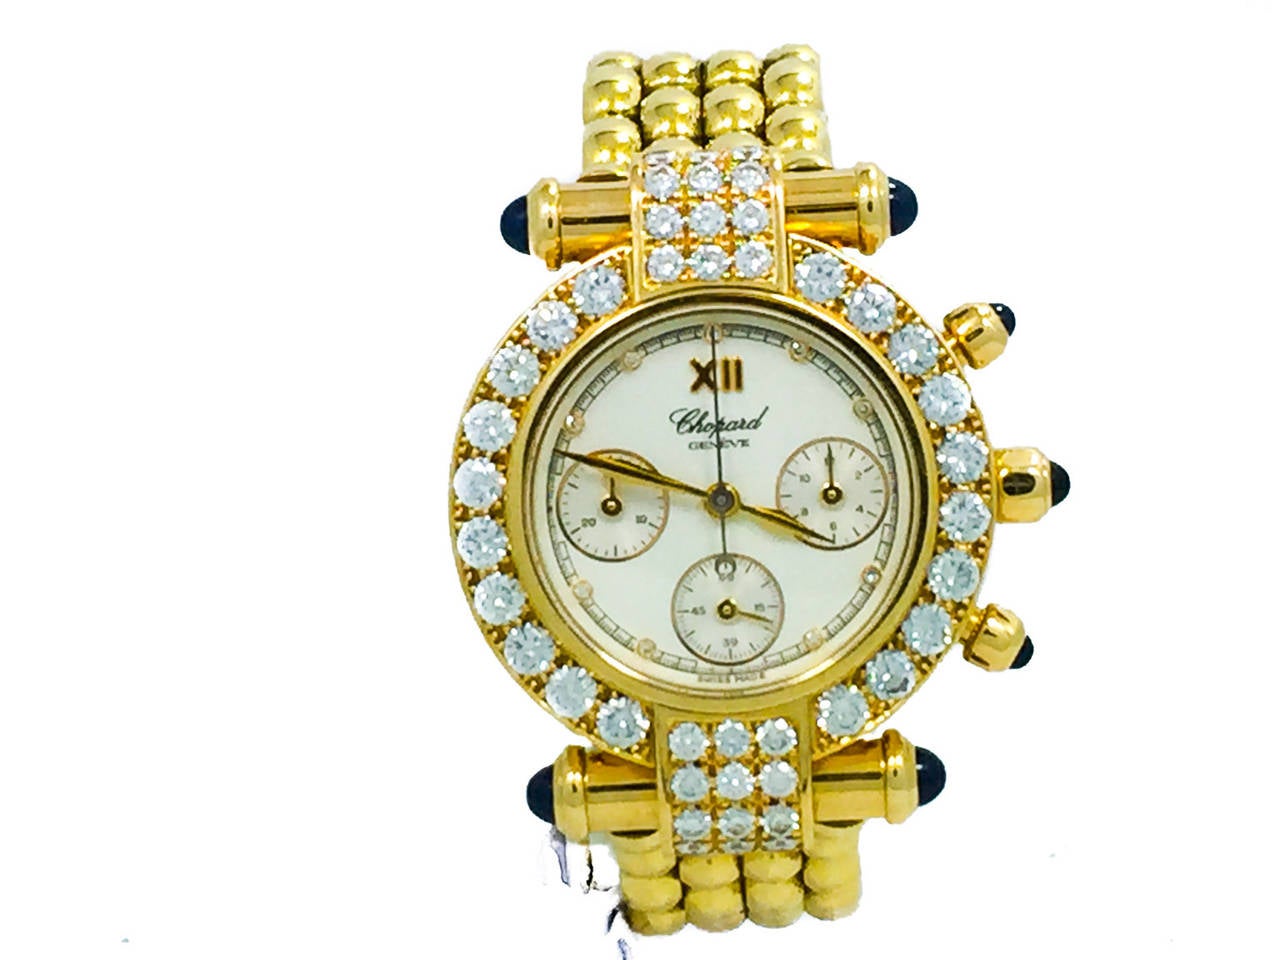 Ladies (32mm) Chopard Imperial 18k Yellow Gold Chronograph Watch W/ Diamond Bezel (3.24 ct) on Bracelet. The Watch is in Great Condition and All Functions Work Perfectly, Movement is Battery Operated. The Watch Bracelet will Fit appx up to a  6-1/4